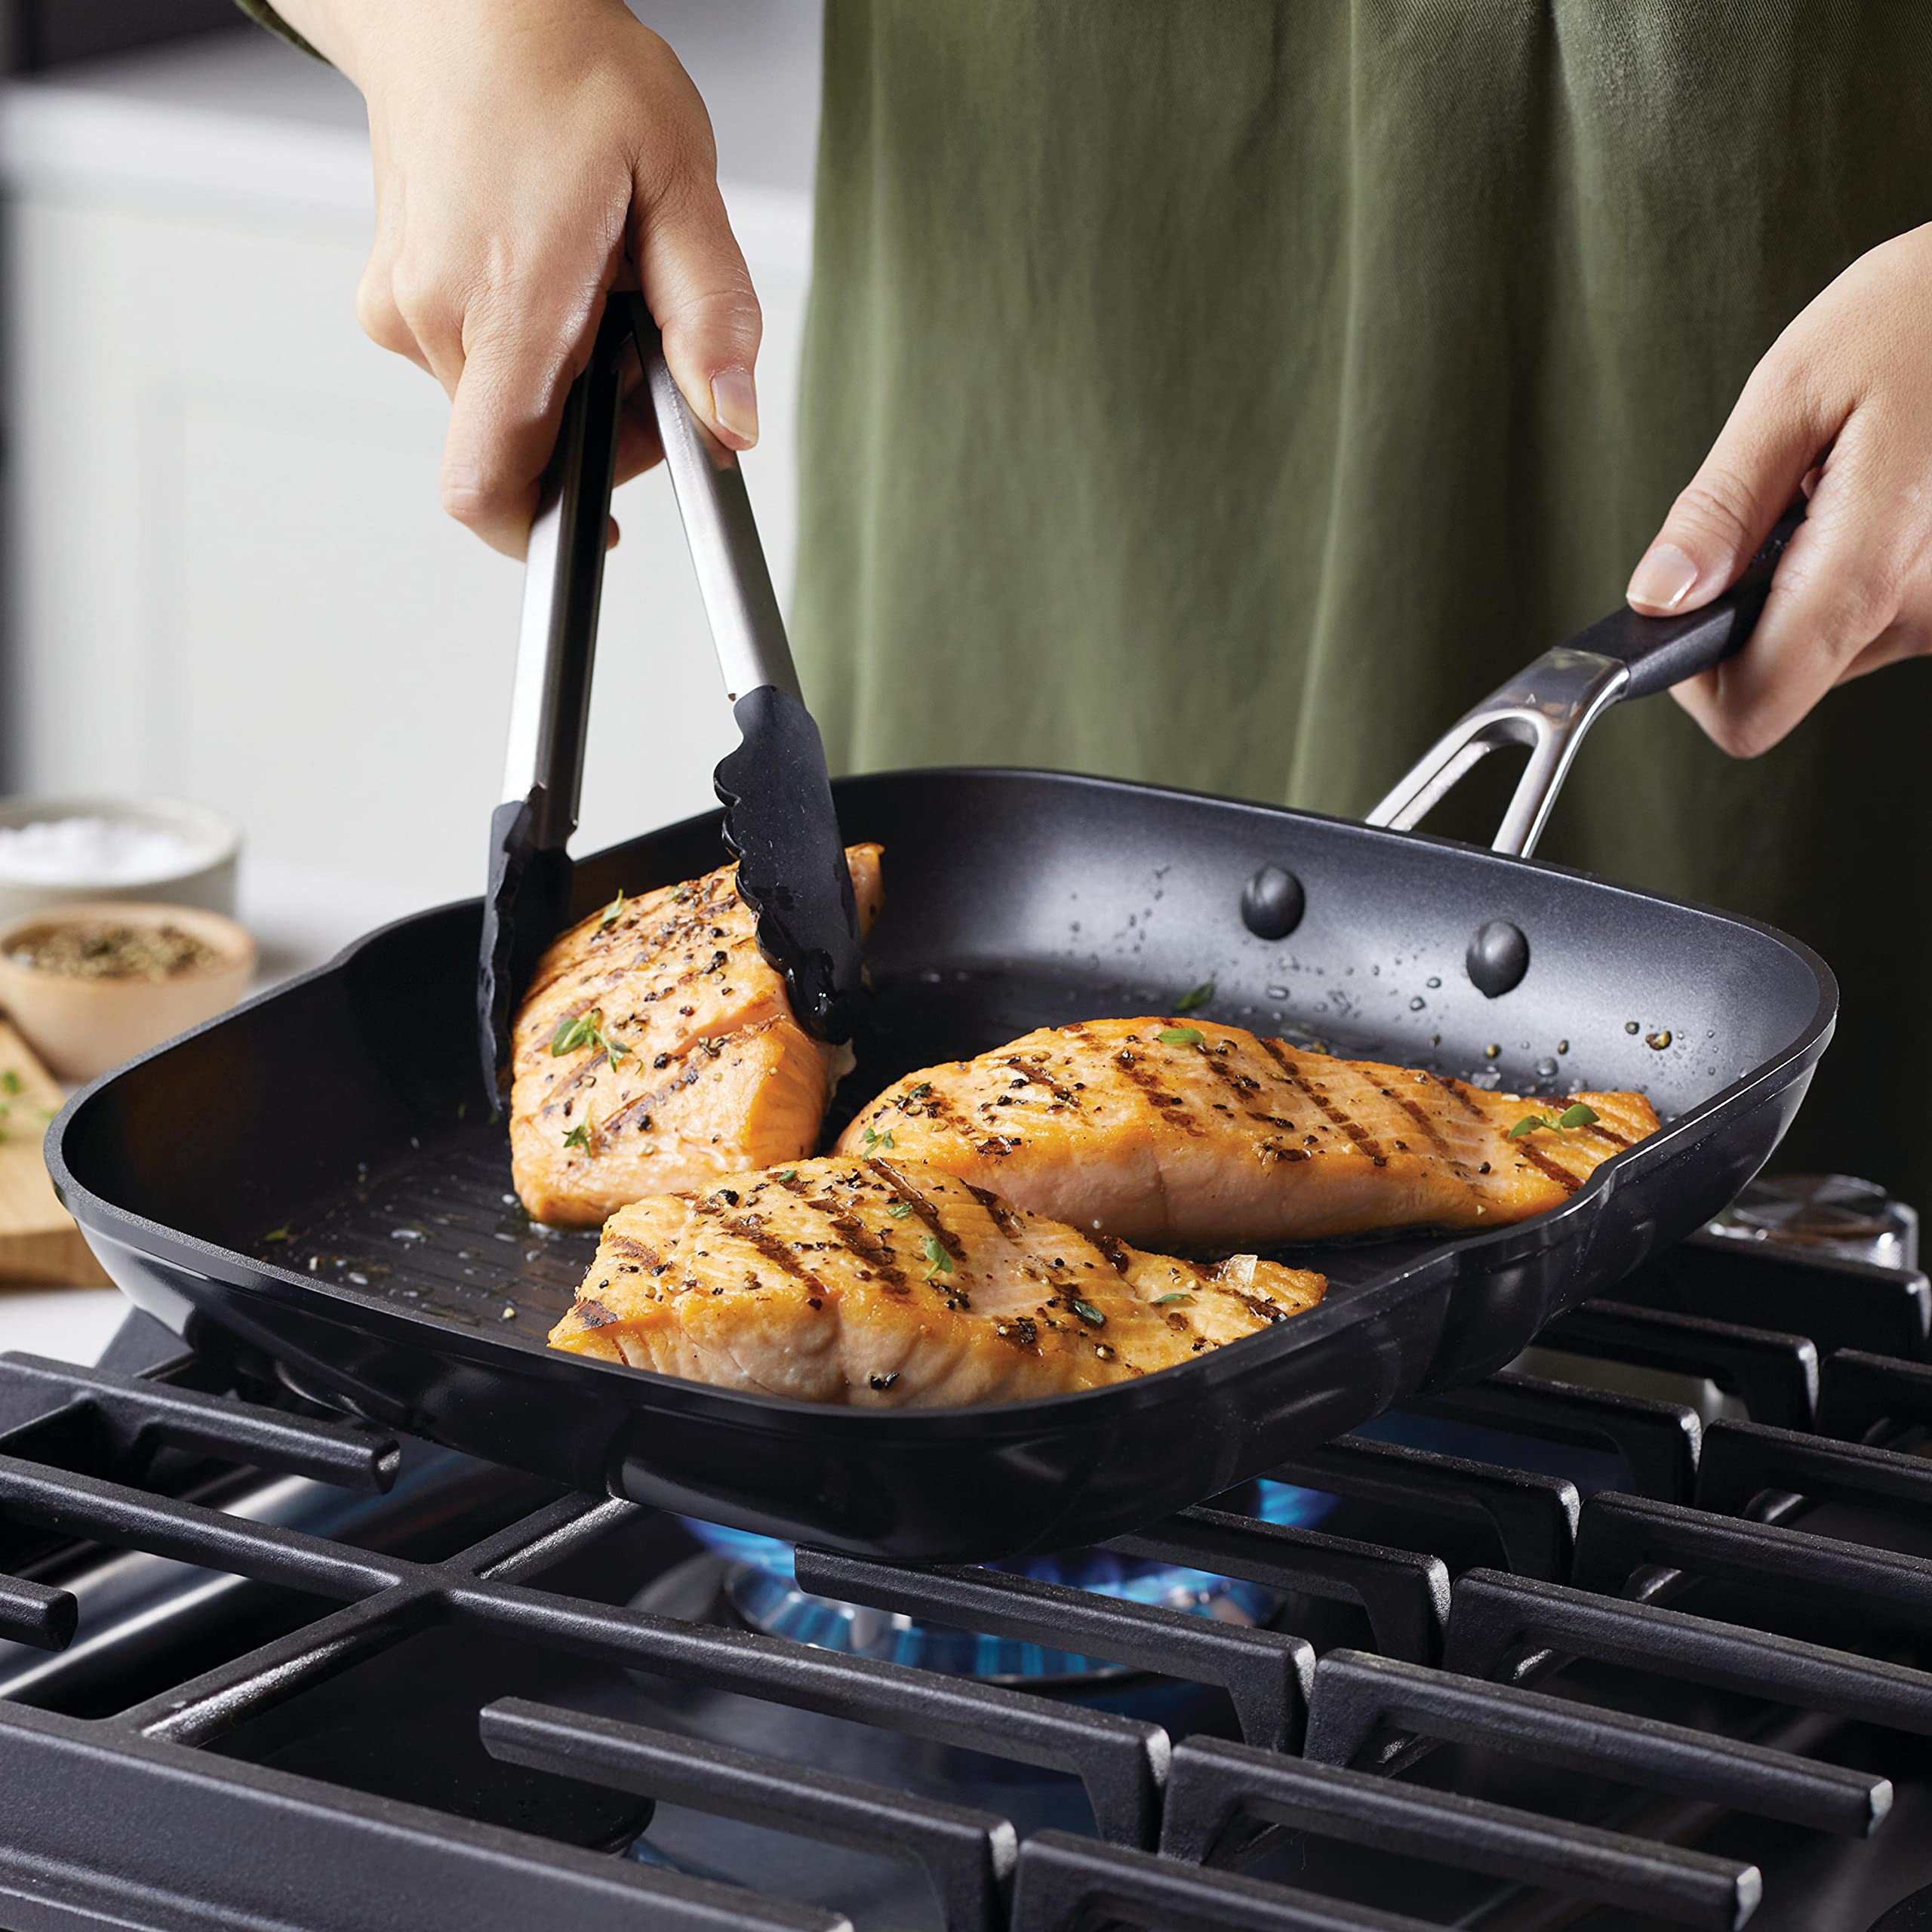 KitchenAid Hard Anodized Nonstick Square Grill Pan/Griddle with Pour Spouts, 11.25 Inch, Onyx Black